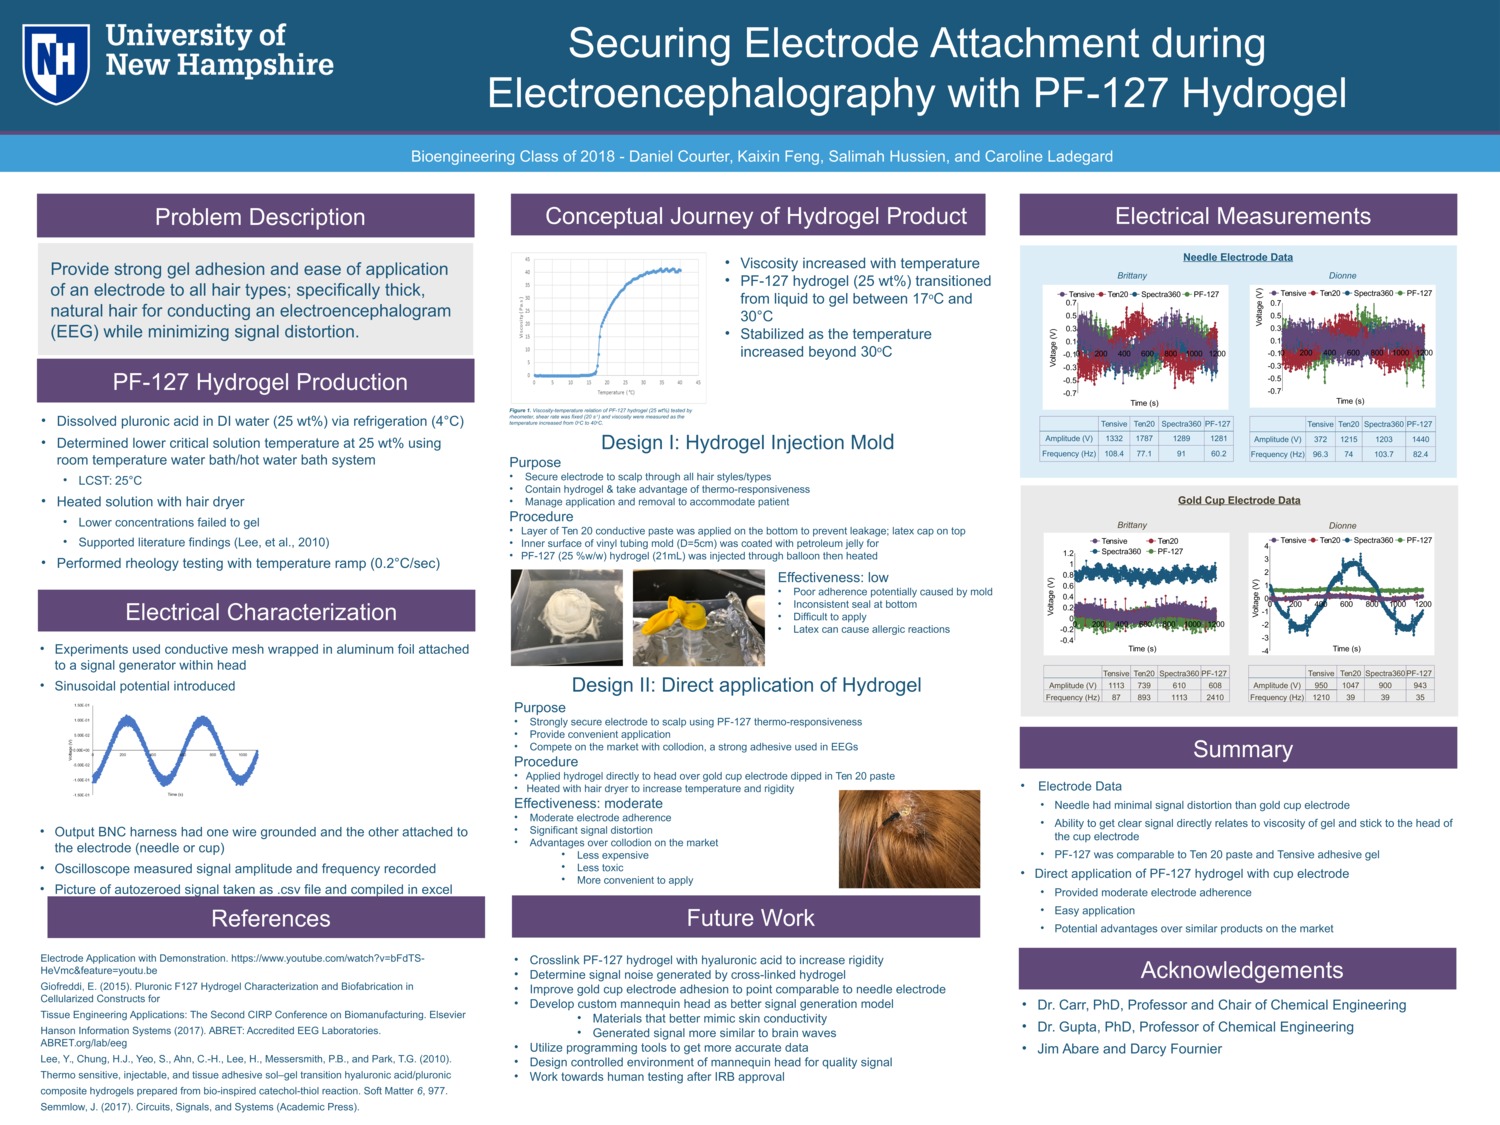 Securing Electrode Attachment During Electroencephalography With Pf-127 Hydrogel by djc2007